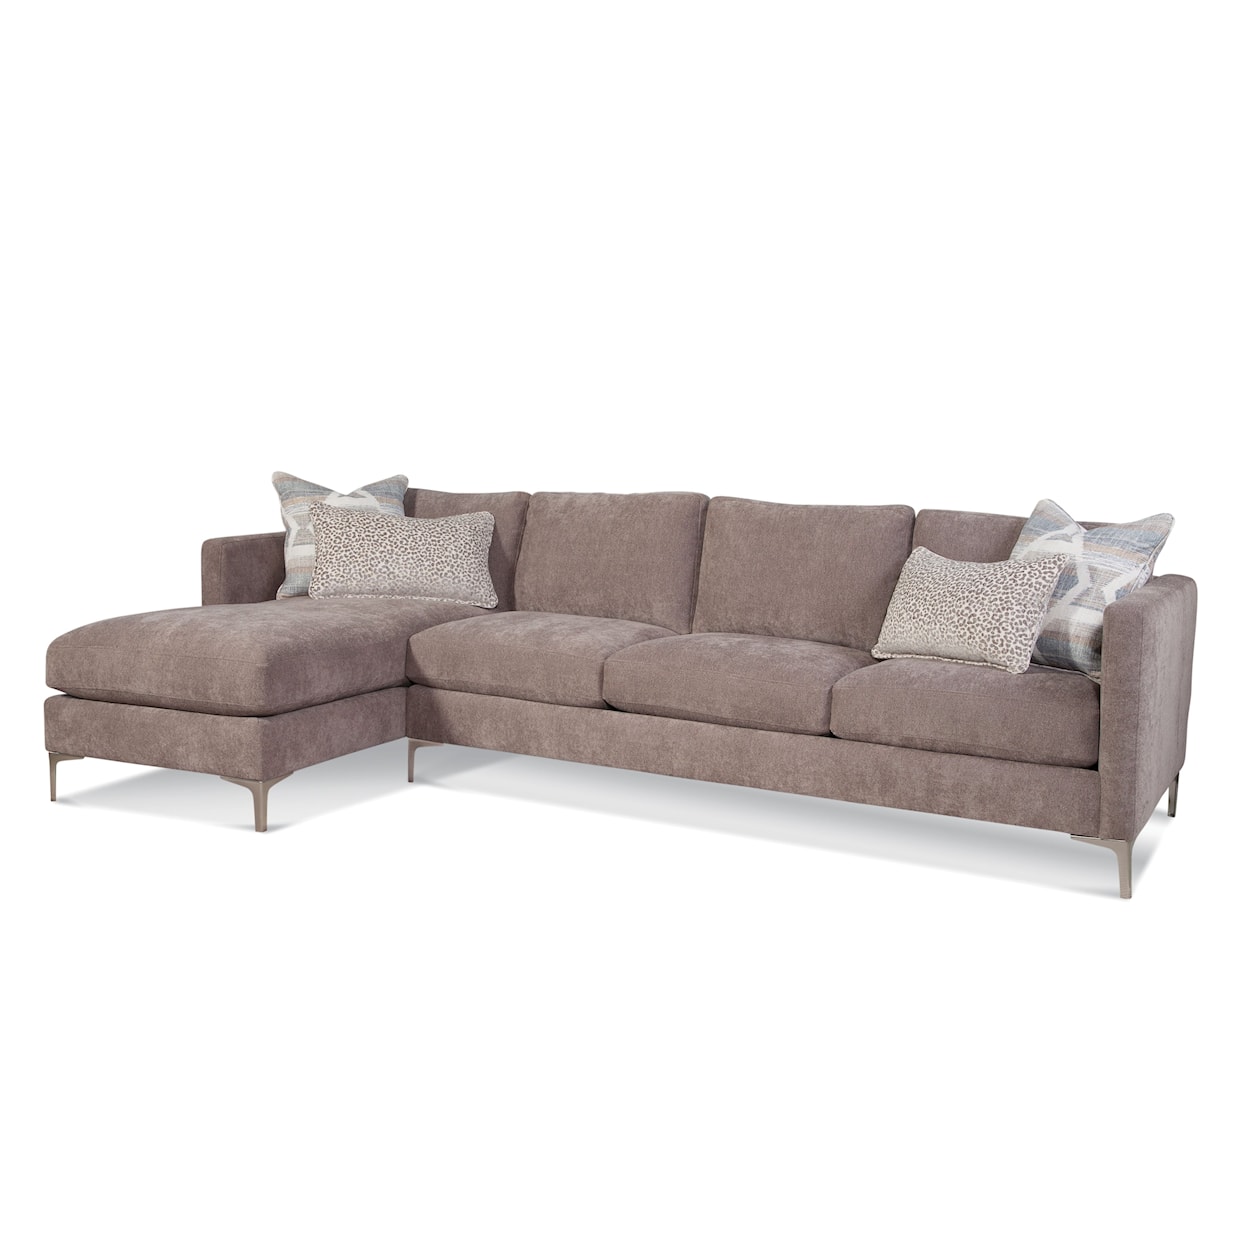 Braxton Culler Lenox 2-Piece Sectional Sofa with Metal Legs